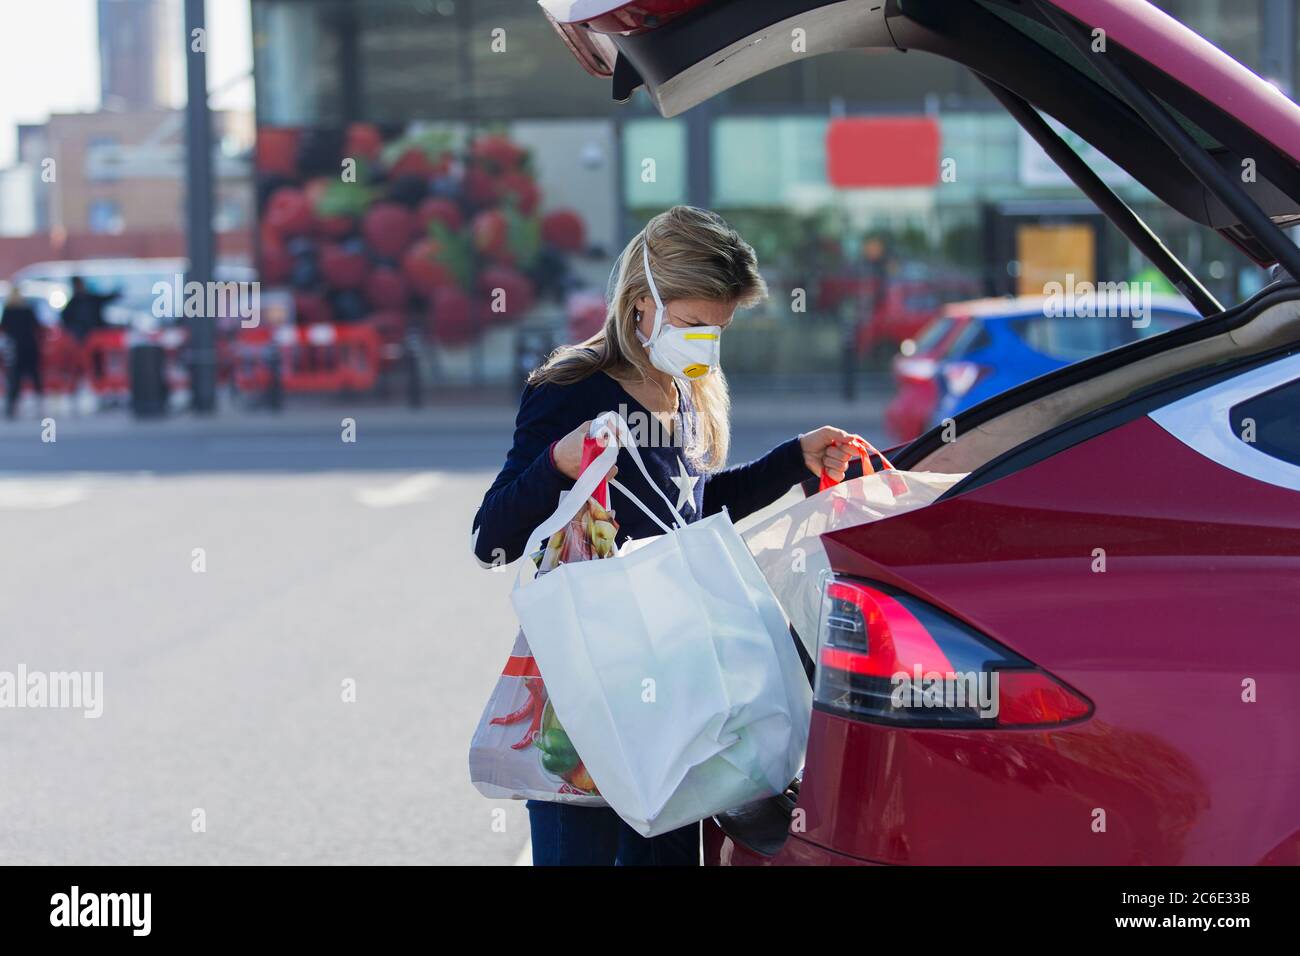 Woman with face mask loading groceries into car in parking lot Stock Photo